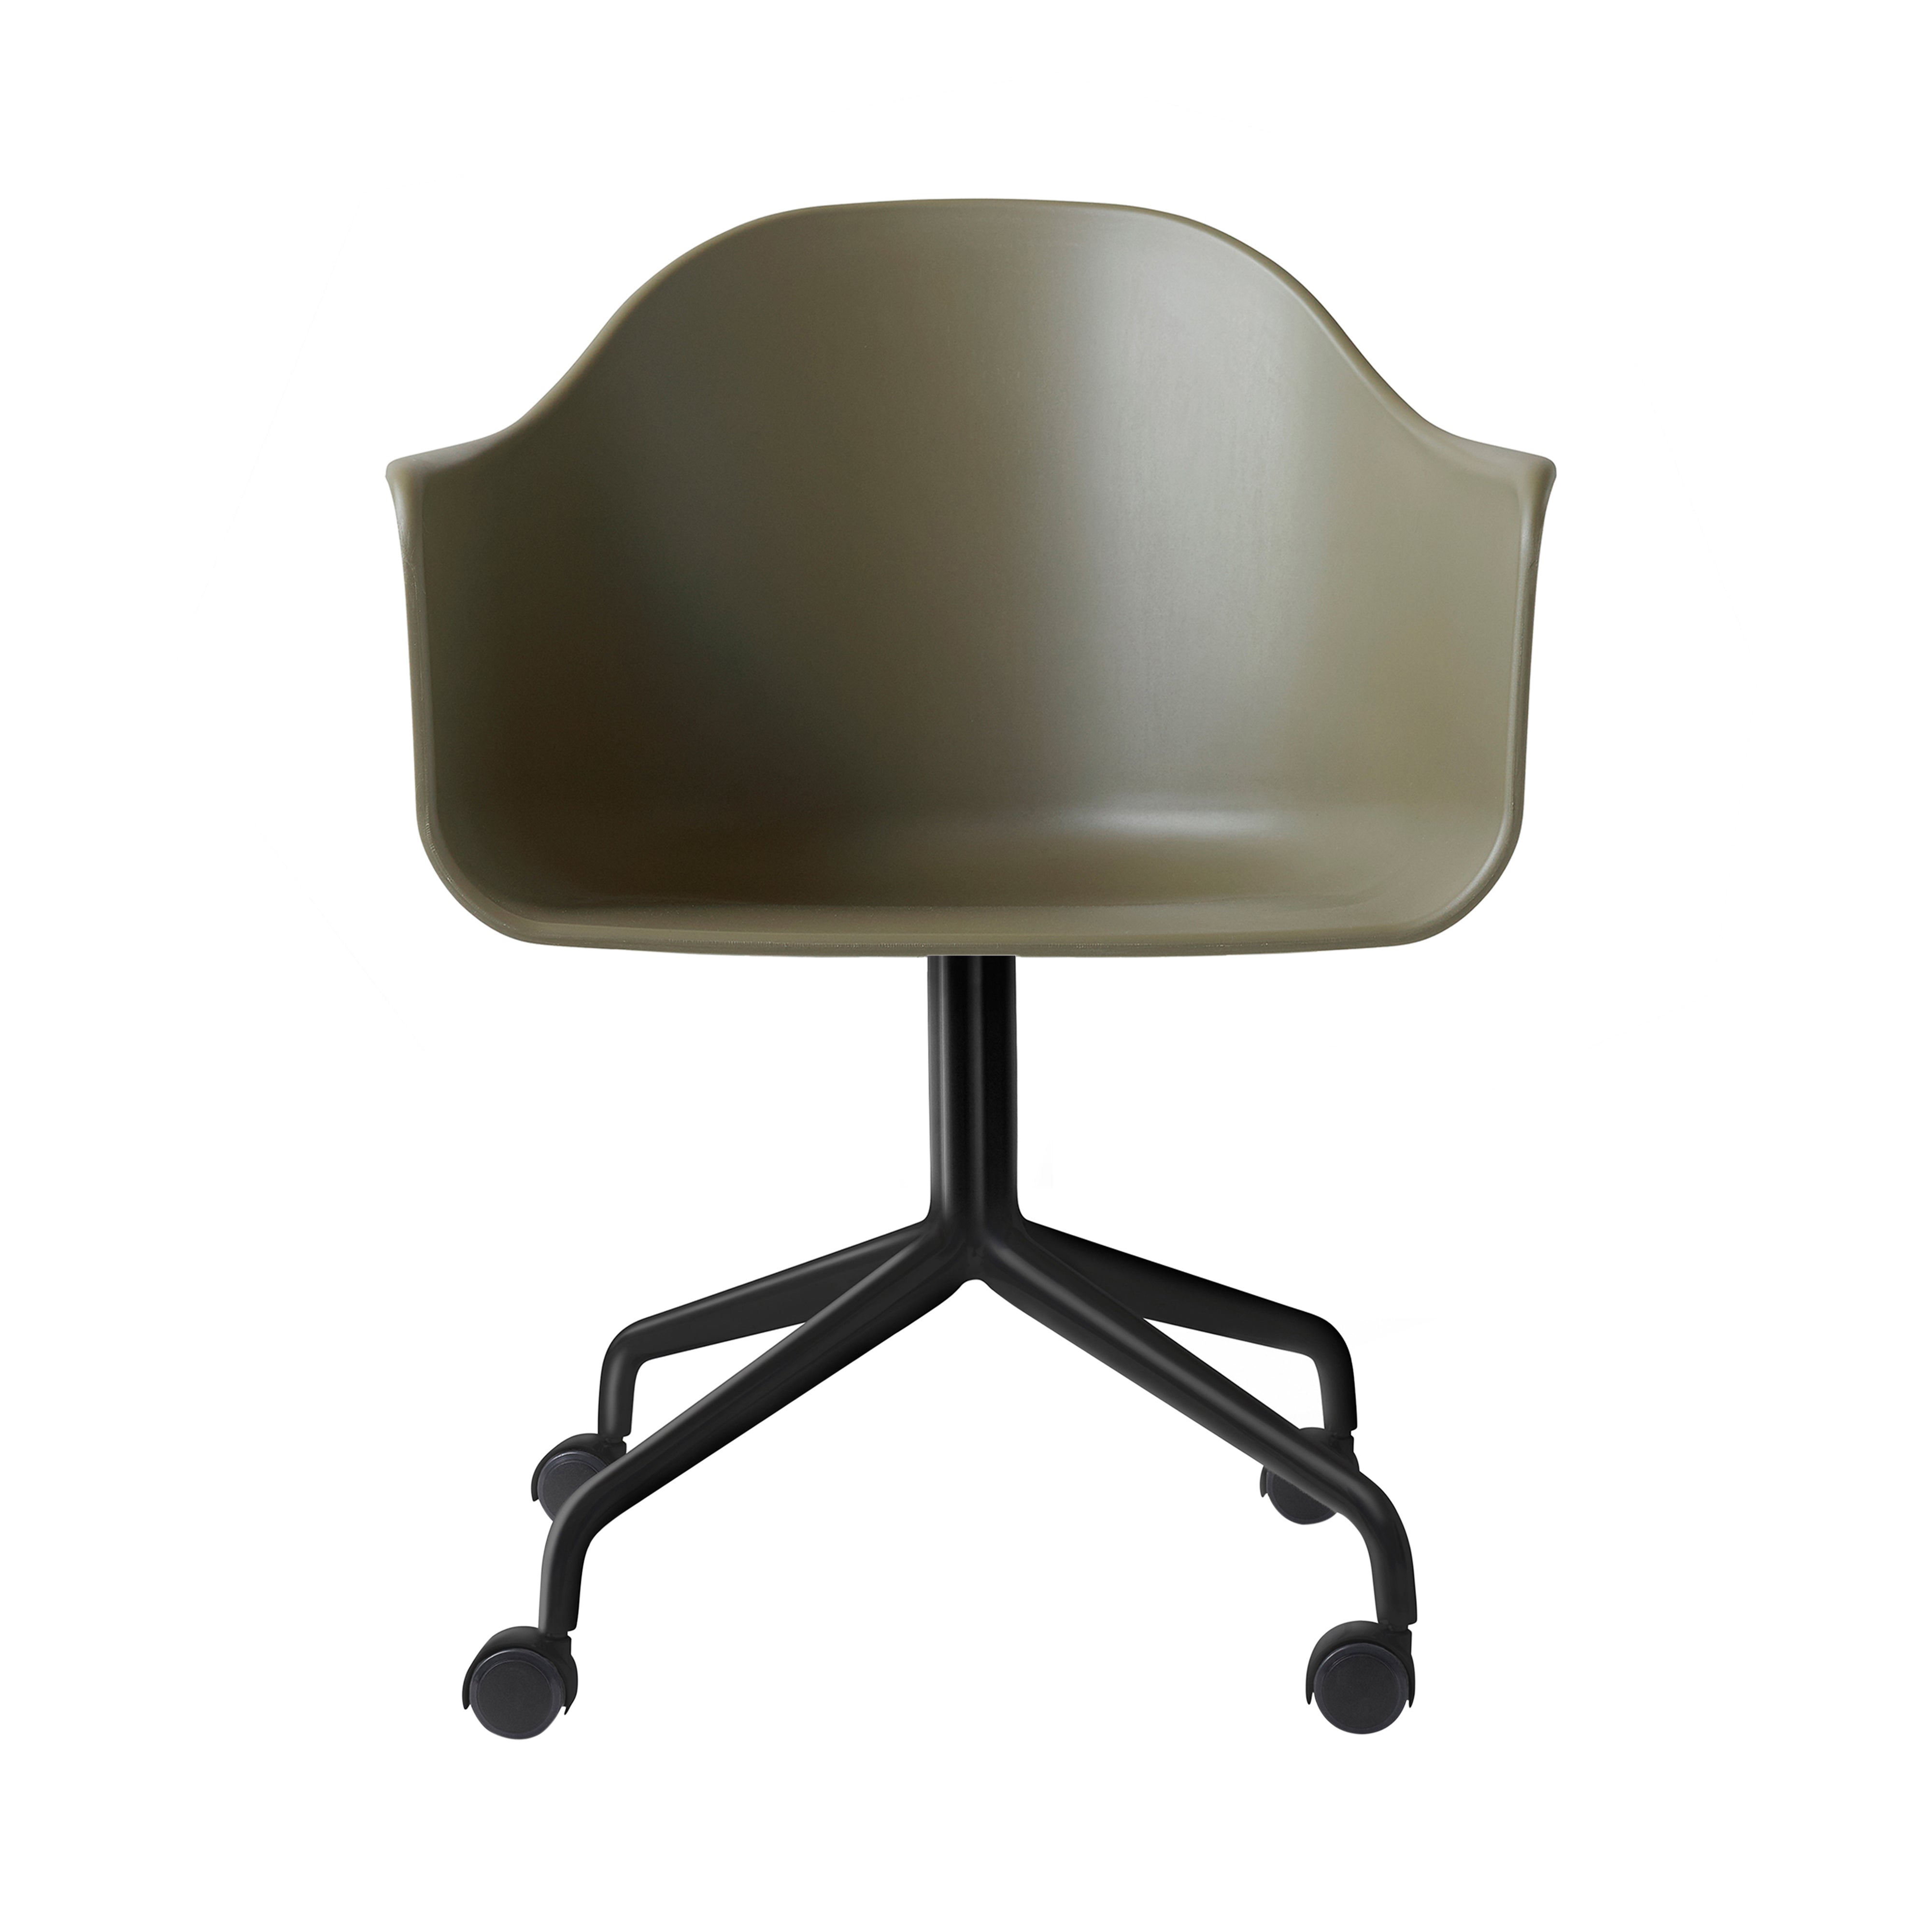 Harbour Dining Chair Star Base with Casters: Black Steel + Olive